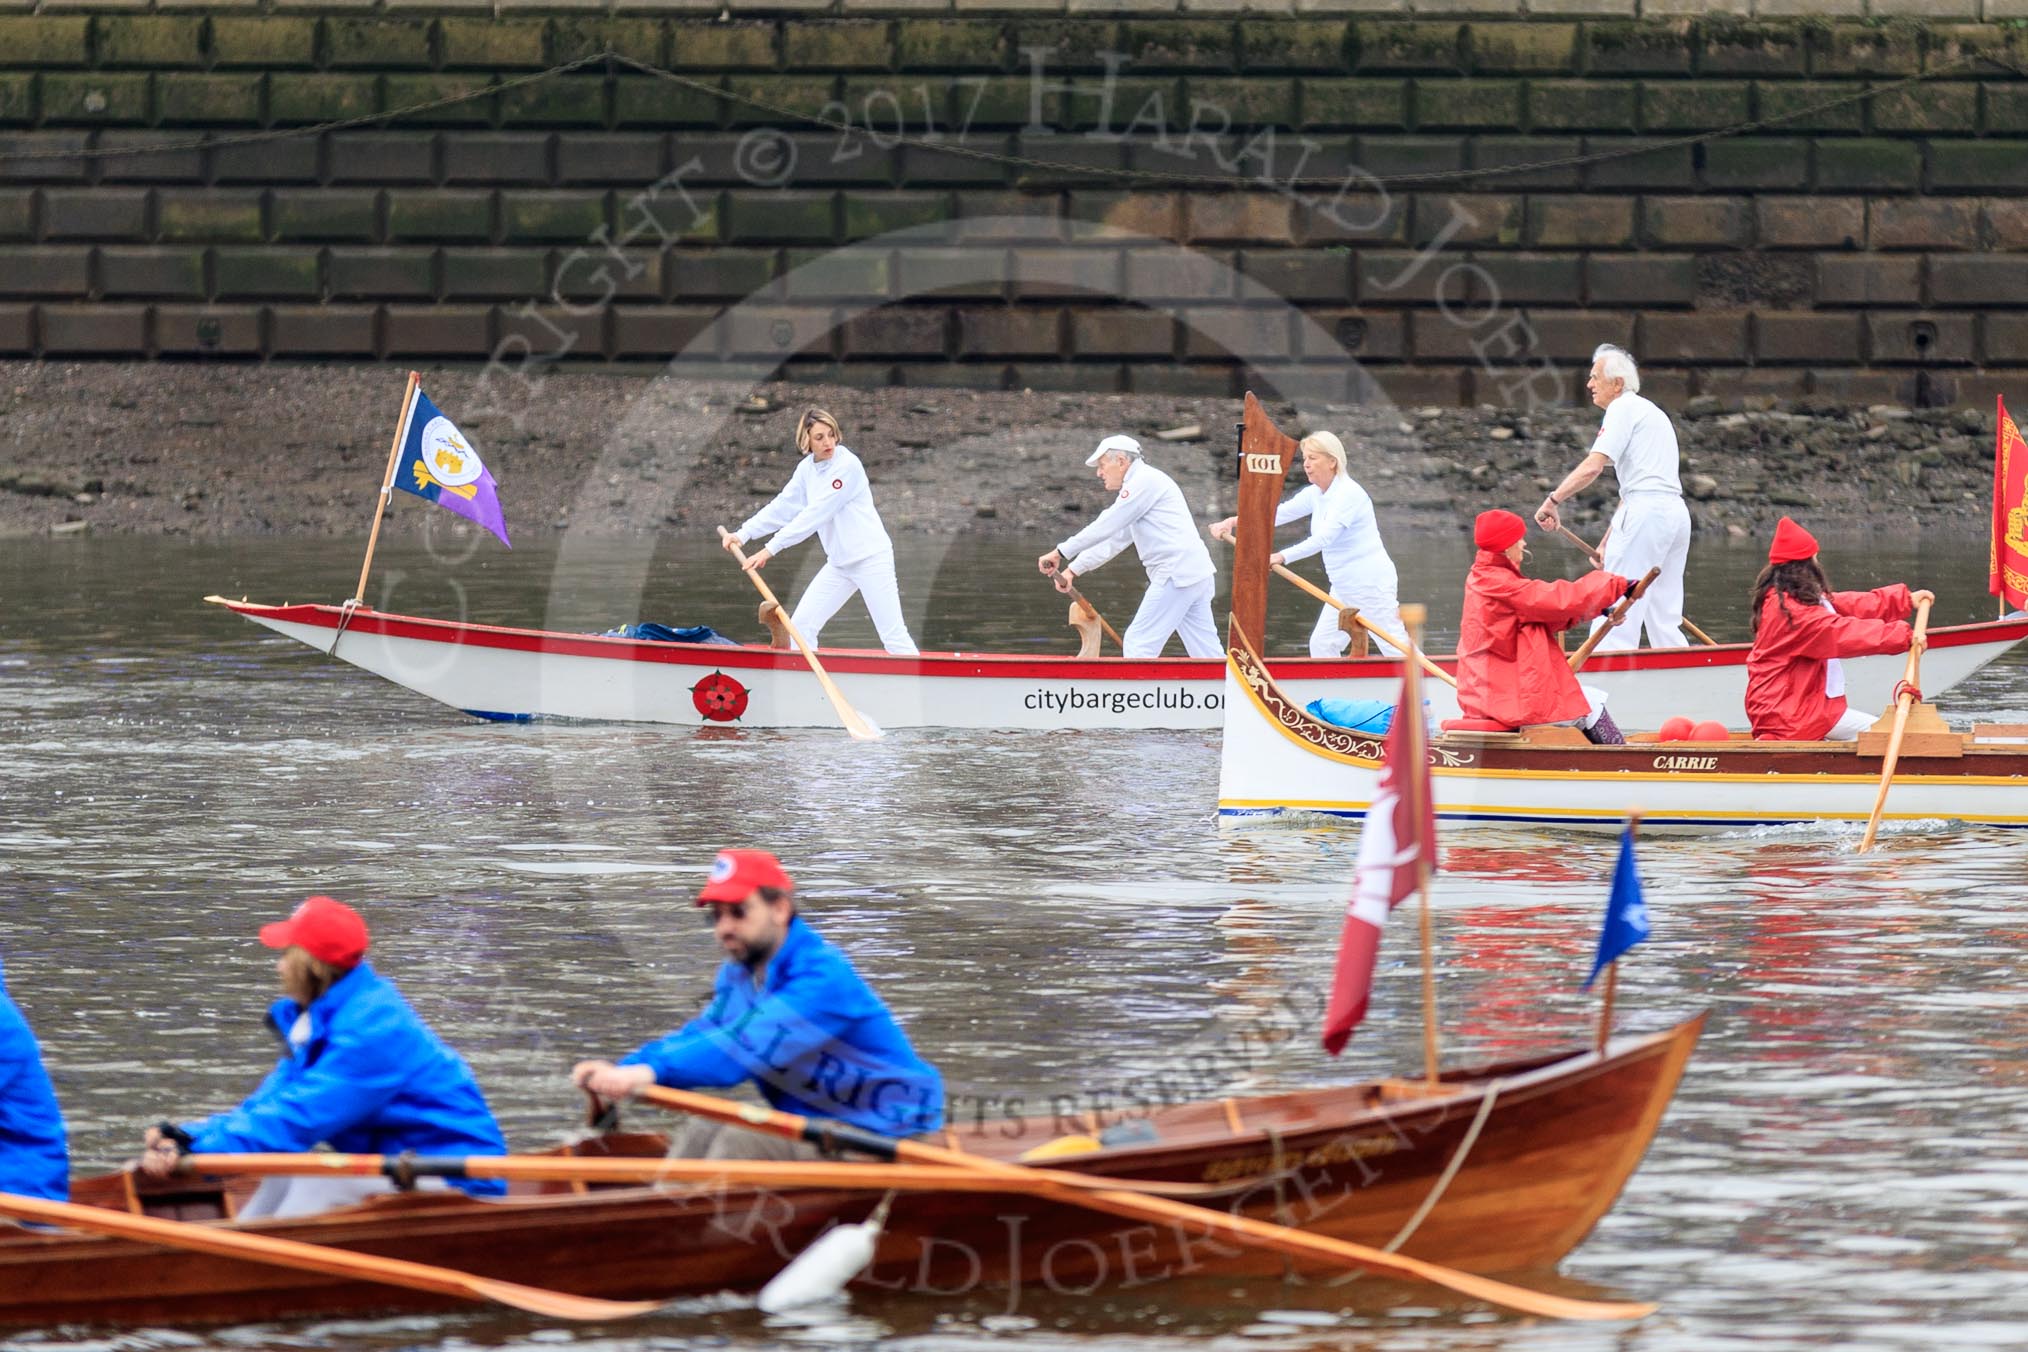 The Cancer Research UK Women's Boat Race 2018: Historic rowing boats (here from CityBargeClub.org.uk) entertaining the crowds.
River Thames between Putney Bridge and Mortlake,
London SW15,

United Kingdom,
on 24 March 2018 at 15:16, image #78